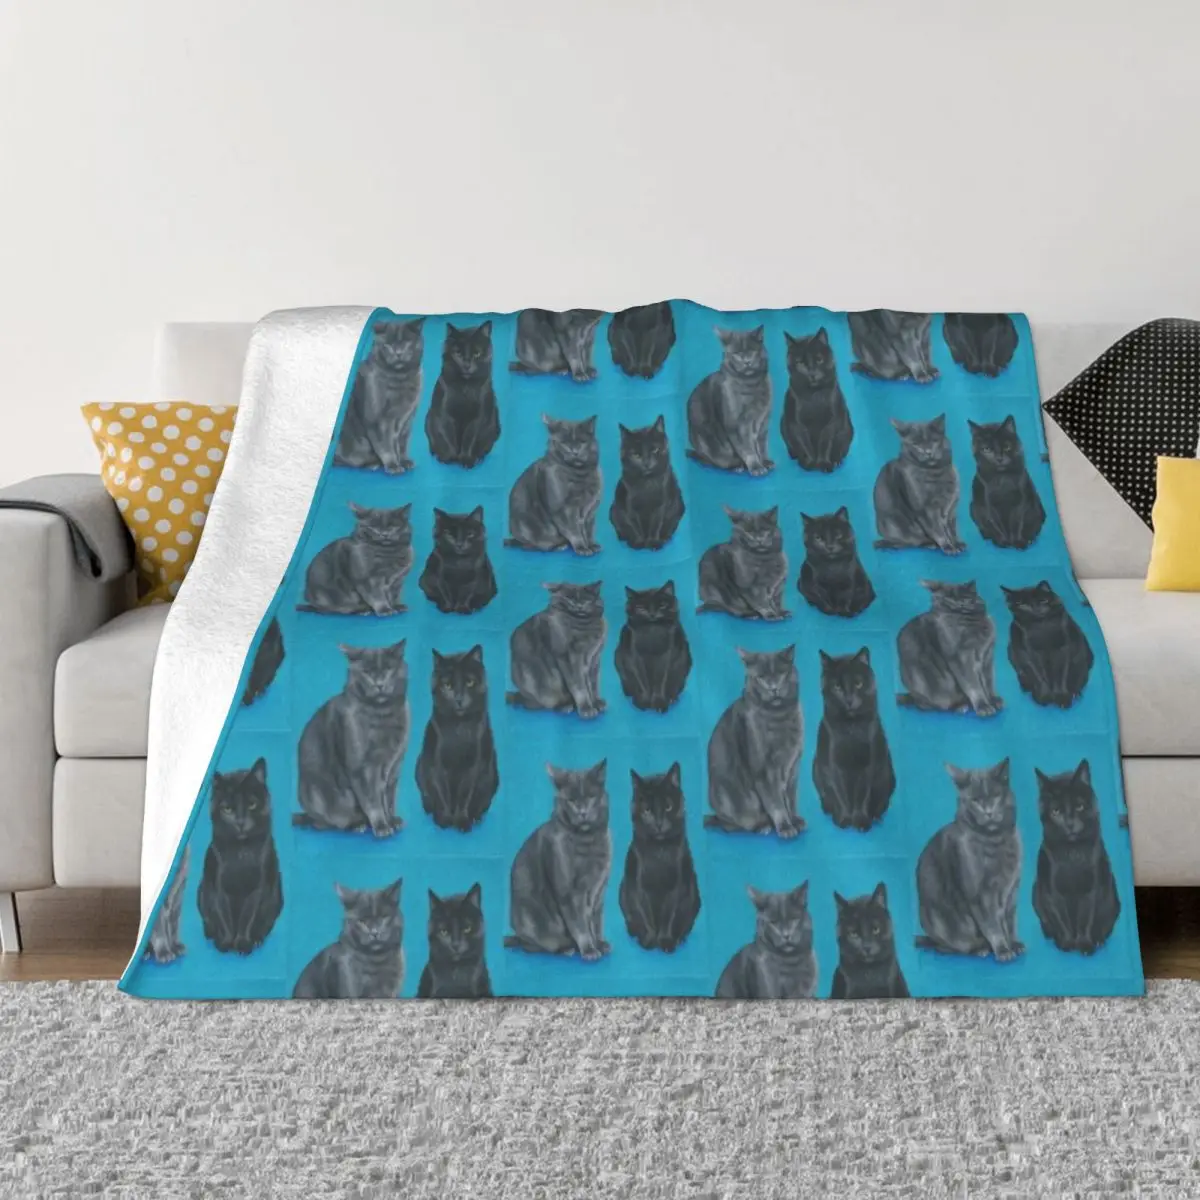 

Two Sassy Cats Hand-Painted Portrait Throw Blanket Blankets Sofas Of Decoration for babies Luxury Thicken Blankets